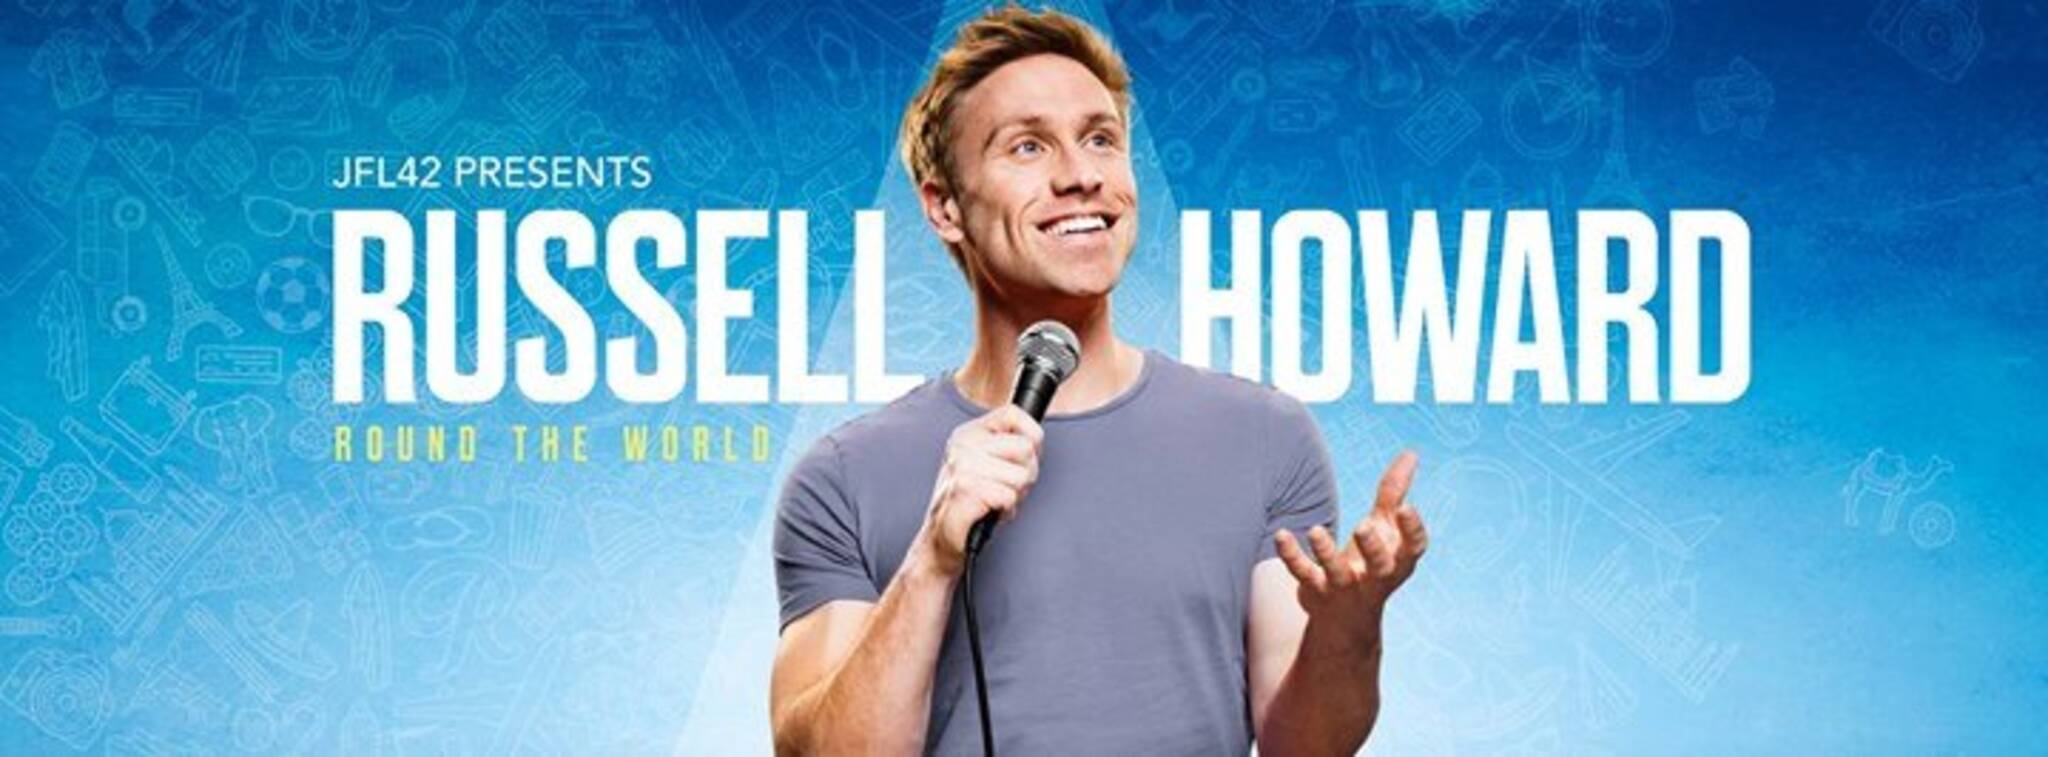 russell howard live tour running time